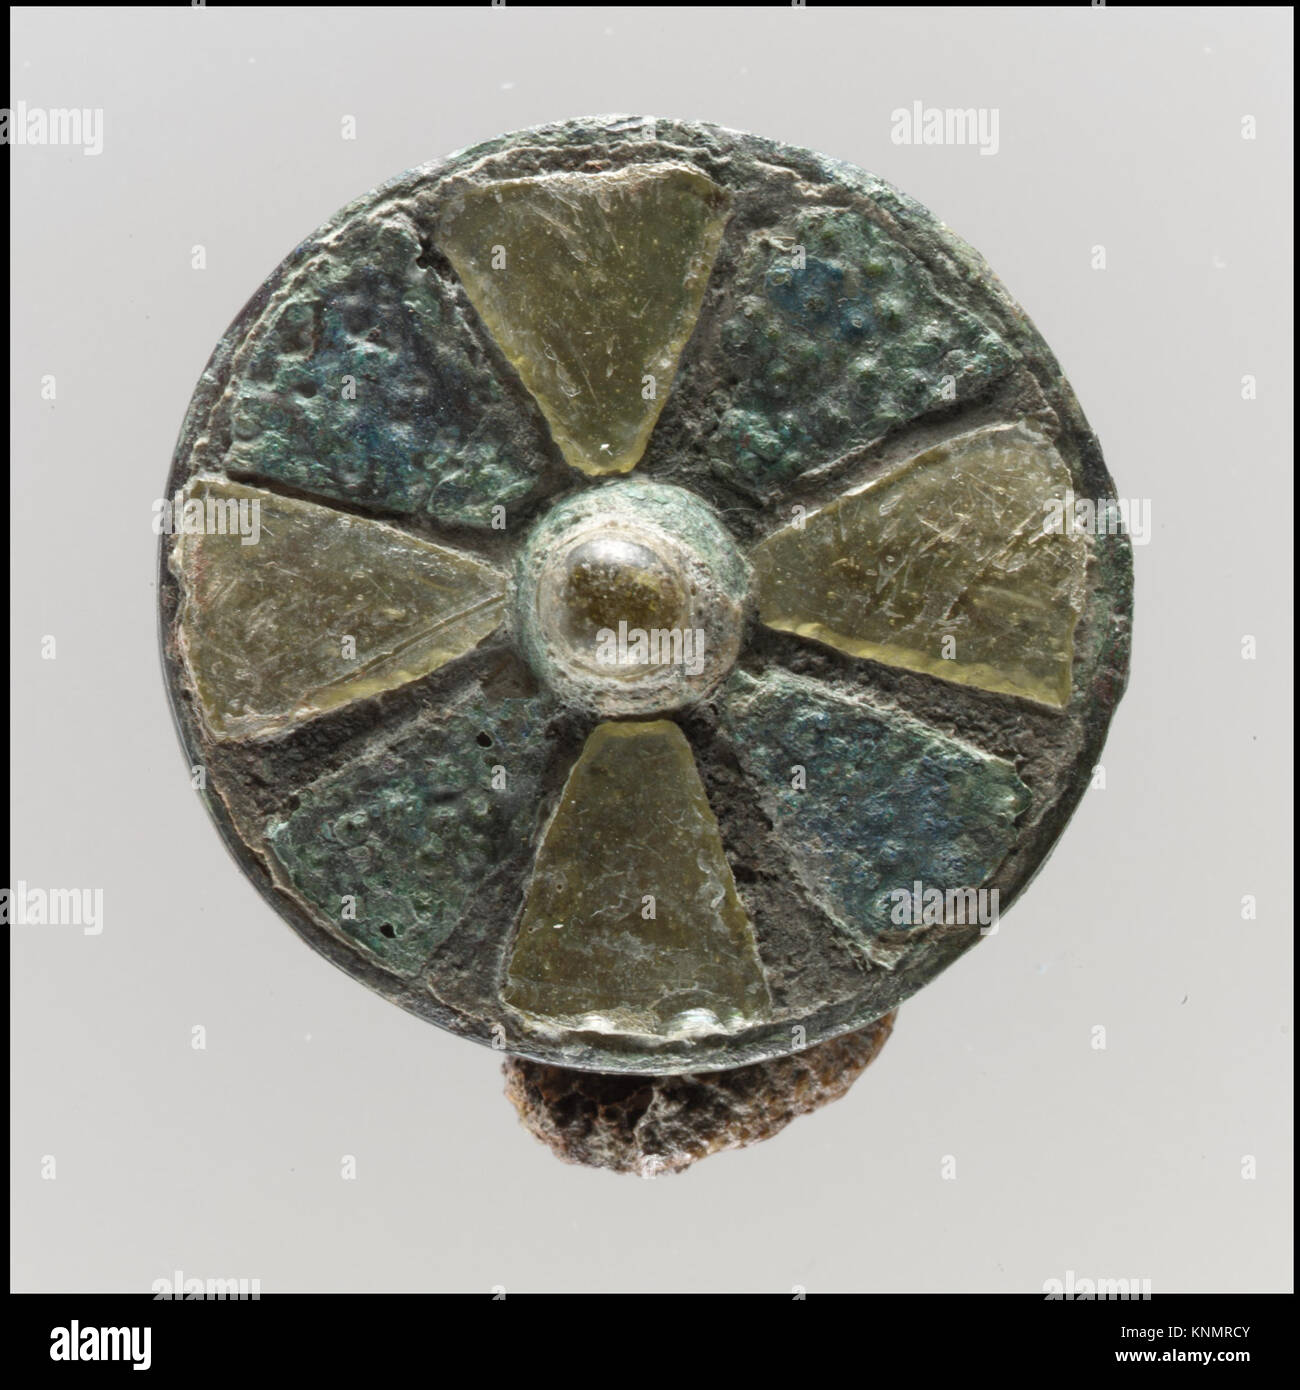 Disk Brooch MET dp30520 465584 Frankish, Disk Brooch, 6th century, Copper alloy cloisons, side and back; glass and patterned copper alloy, Overall: 1 3/8 x 13/16 in. (3.5 x 2 cm). The Metropolitan Museum of Art, New York. Gift of J. Pierpont Morgan, 1917 (17.193.259) Stock Photo